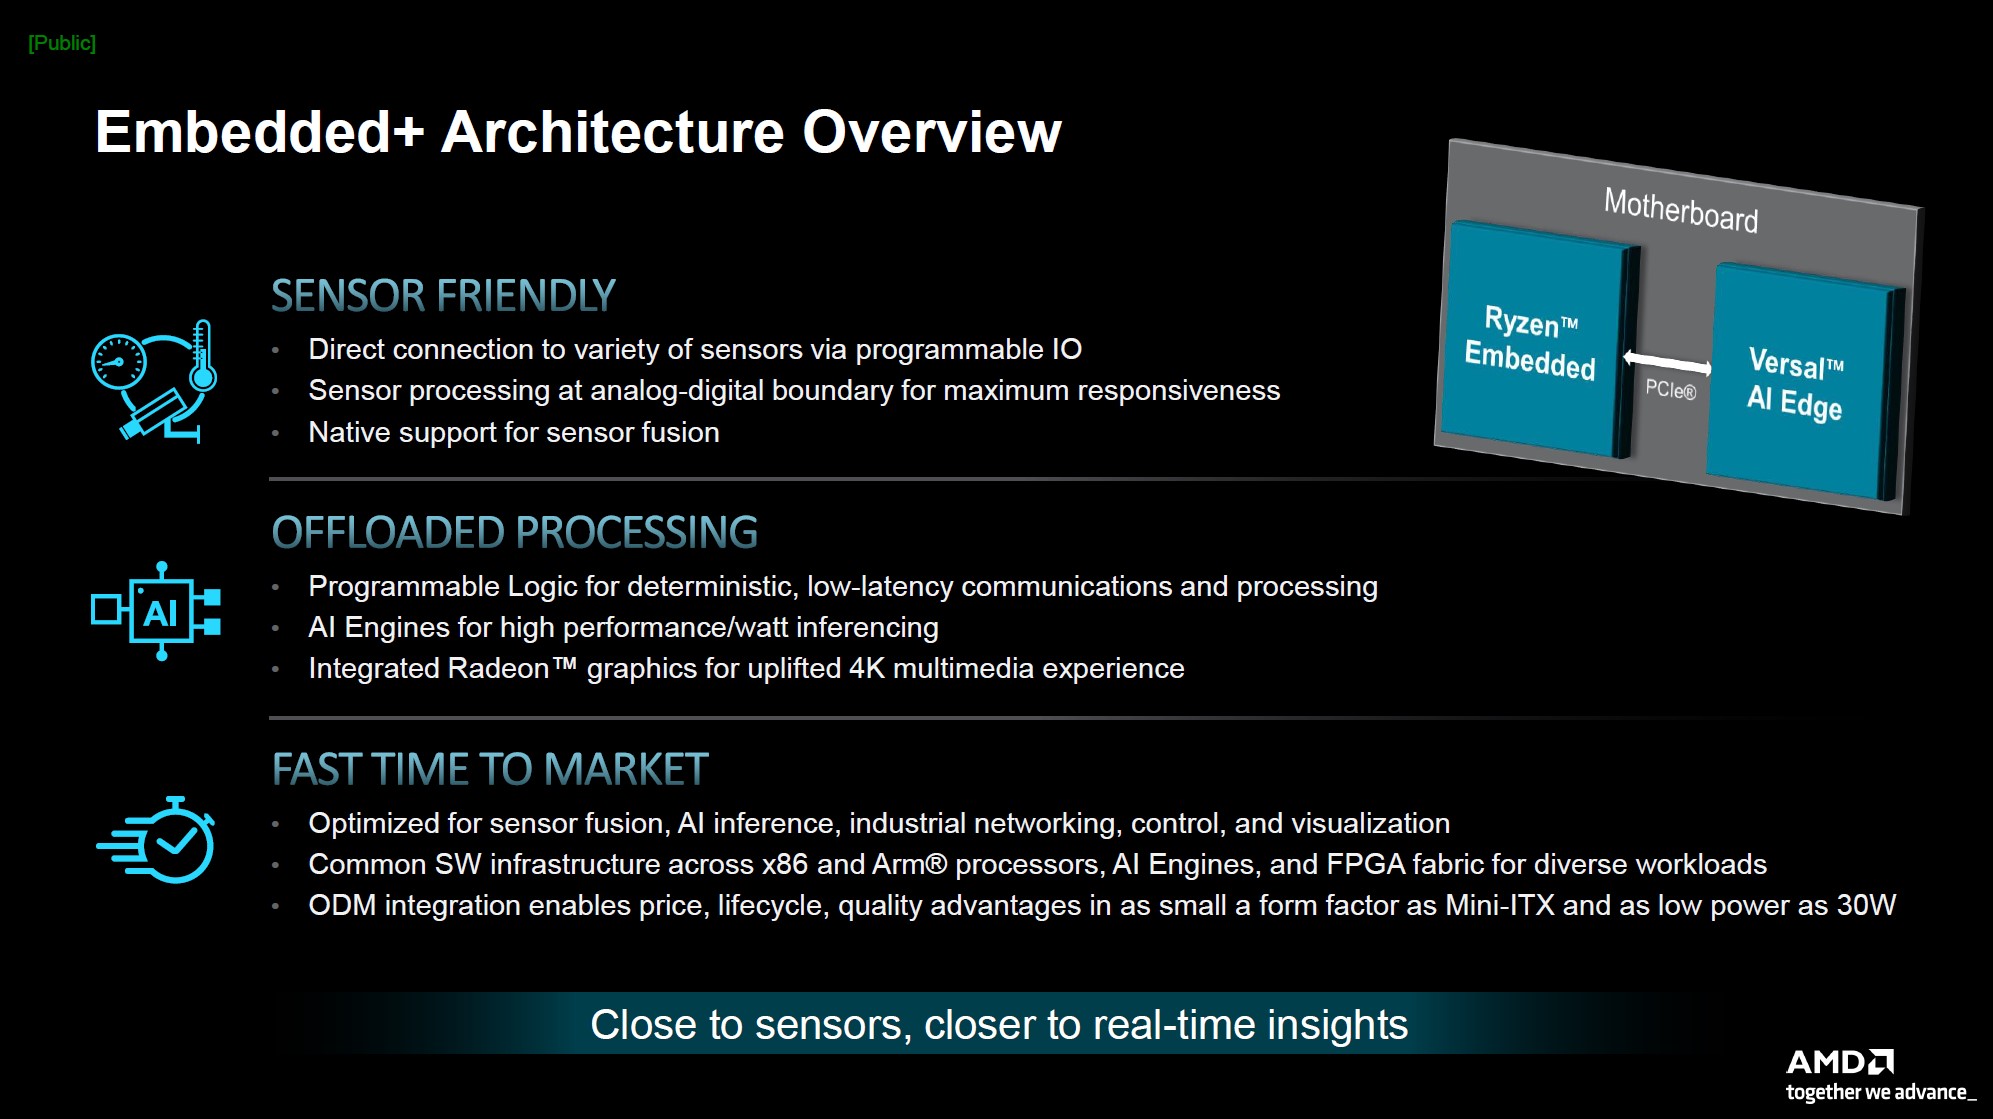 AMD-Embedded-Plus-Architecture-Overview.jpg